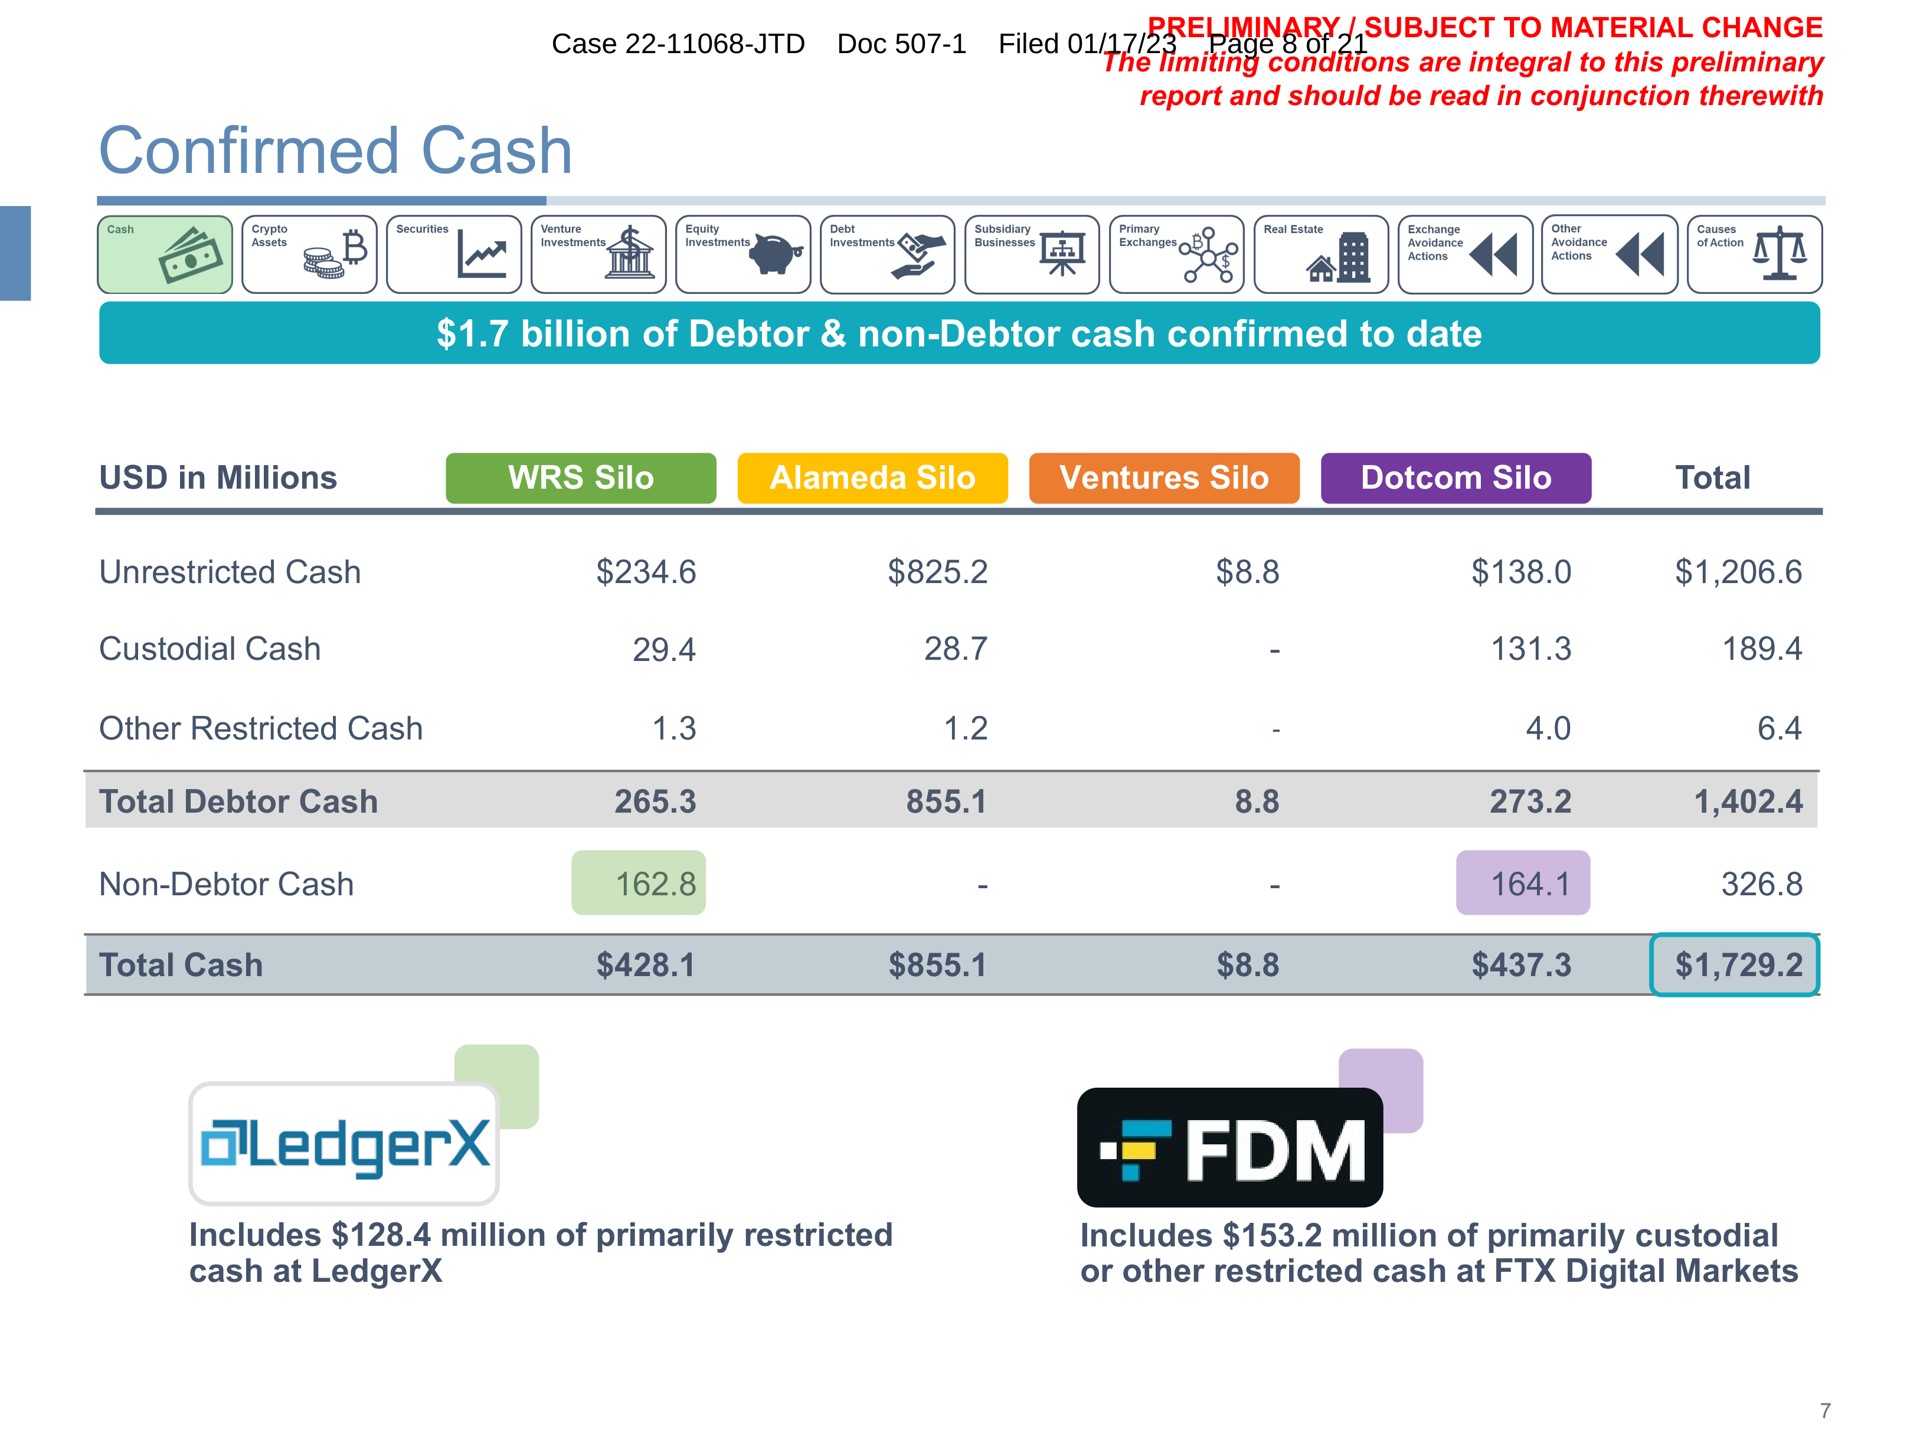 confirmed cash billion of debtor non debtor cash confirmed to date in millions silo alameda silo ventures silo silo total unrestricted cash custodial cash other restricted cash total debtor cash non debtor cash total cash includes million of primarily restricted cash at includes million of primarily custodial or other restricted cash at digital markets case doc filed material change | FTX Trading